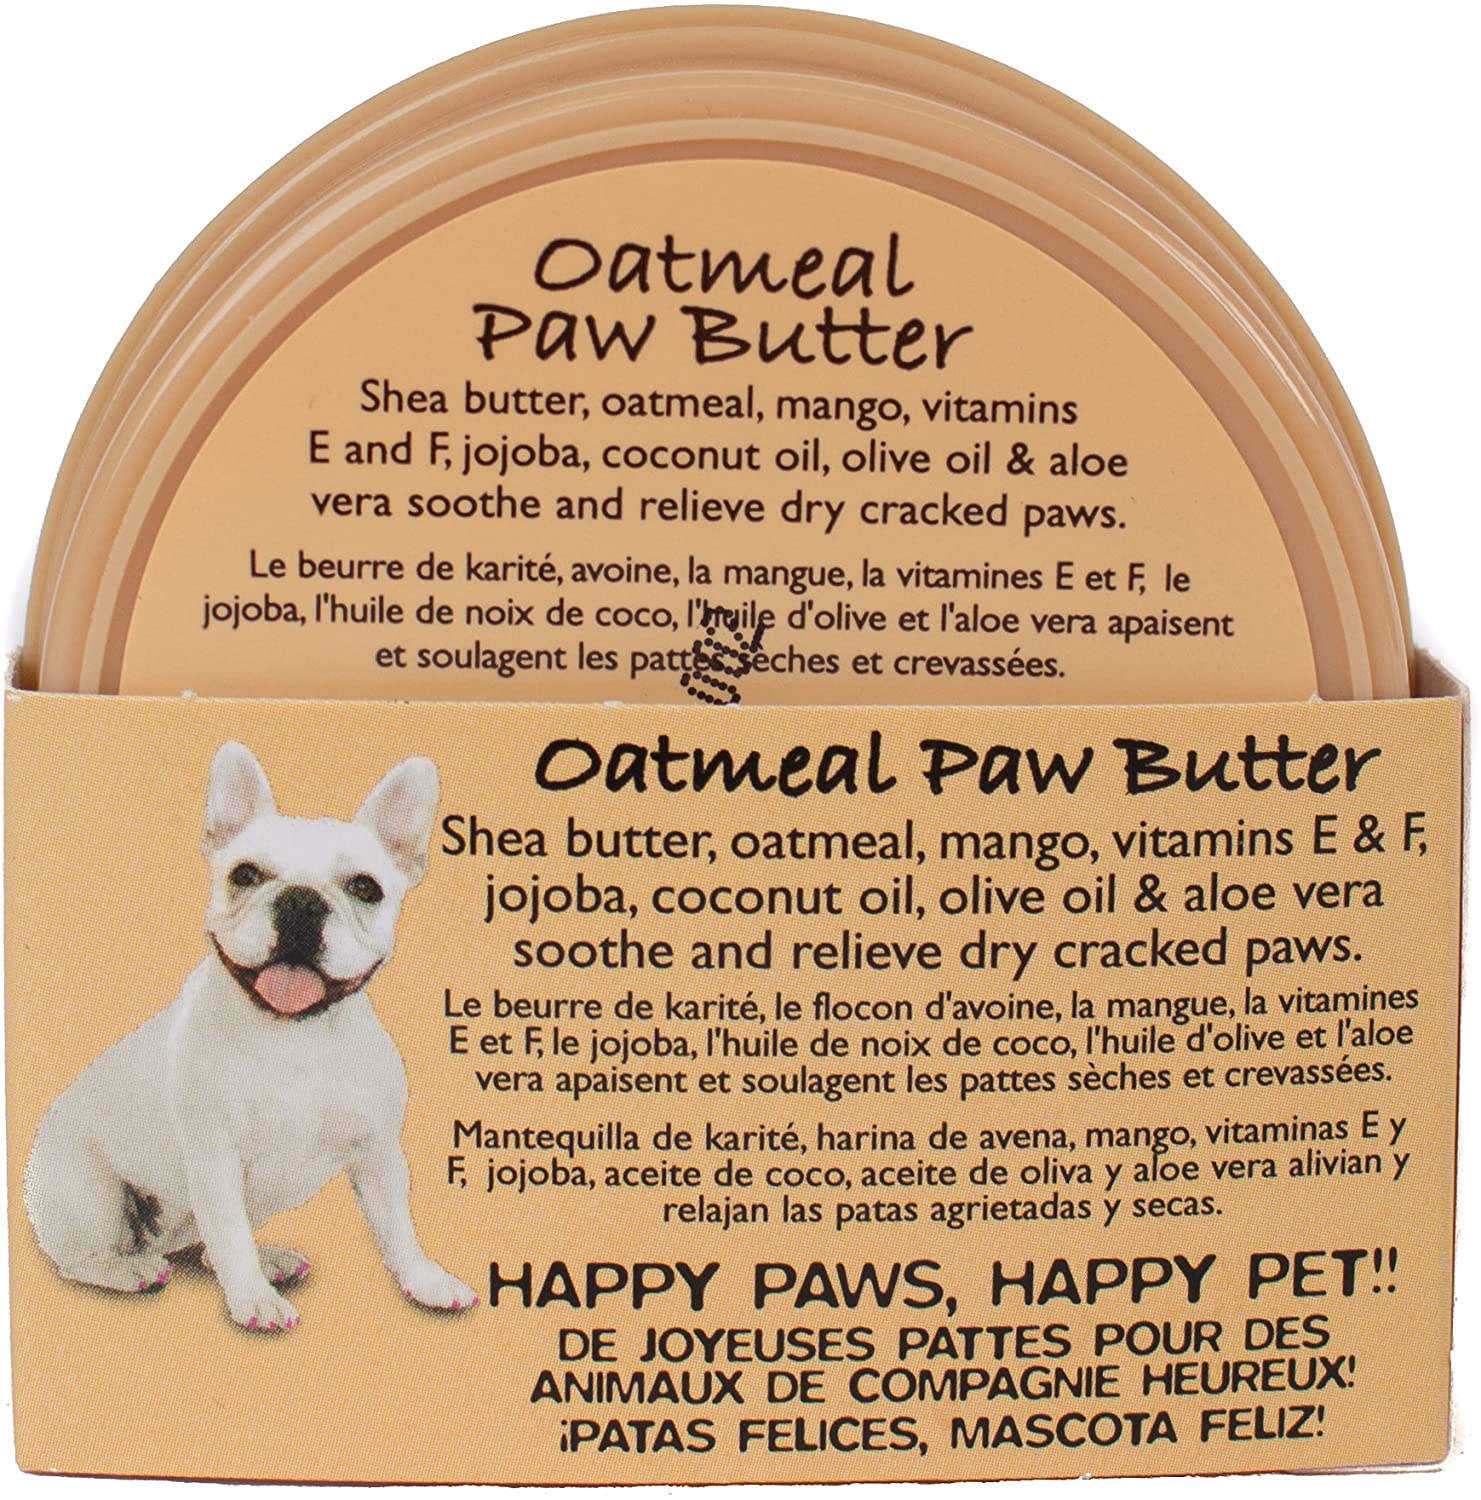  Oatmeal Paw Butter 